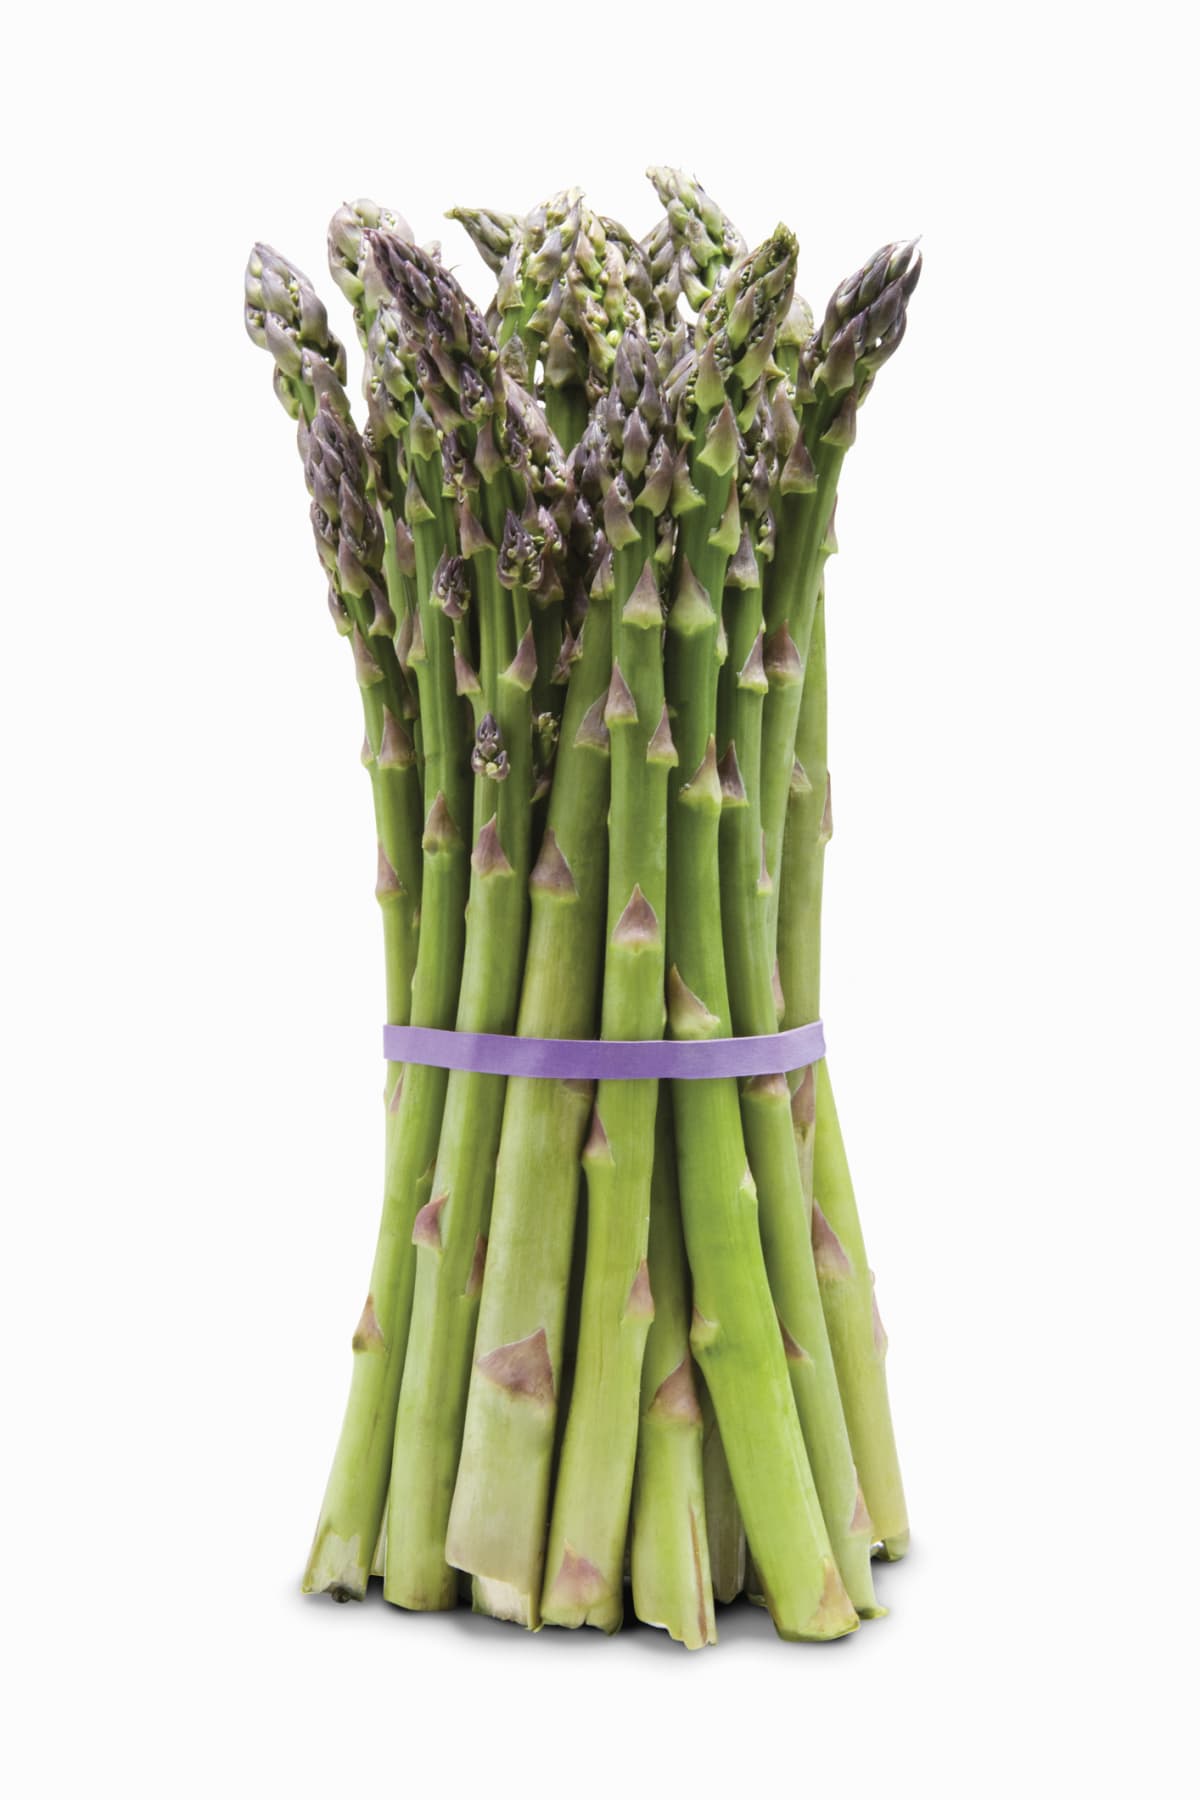 Asparagus bound together by a band